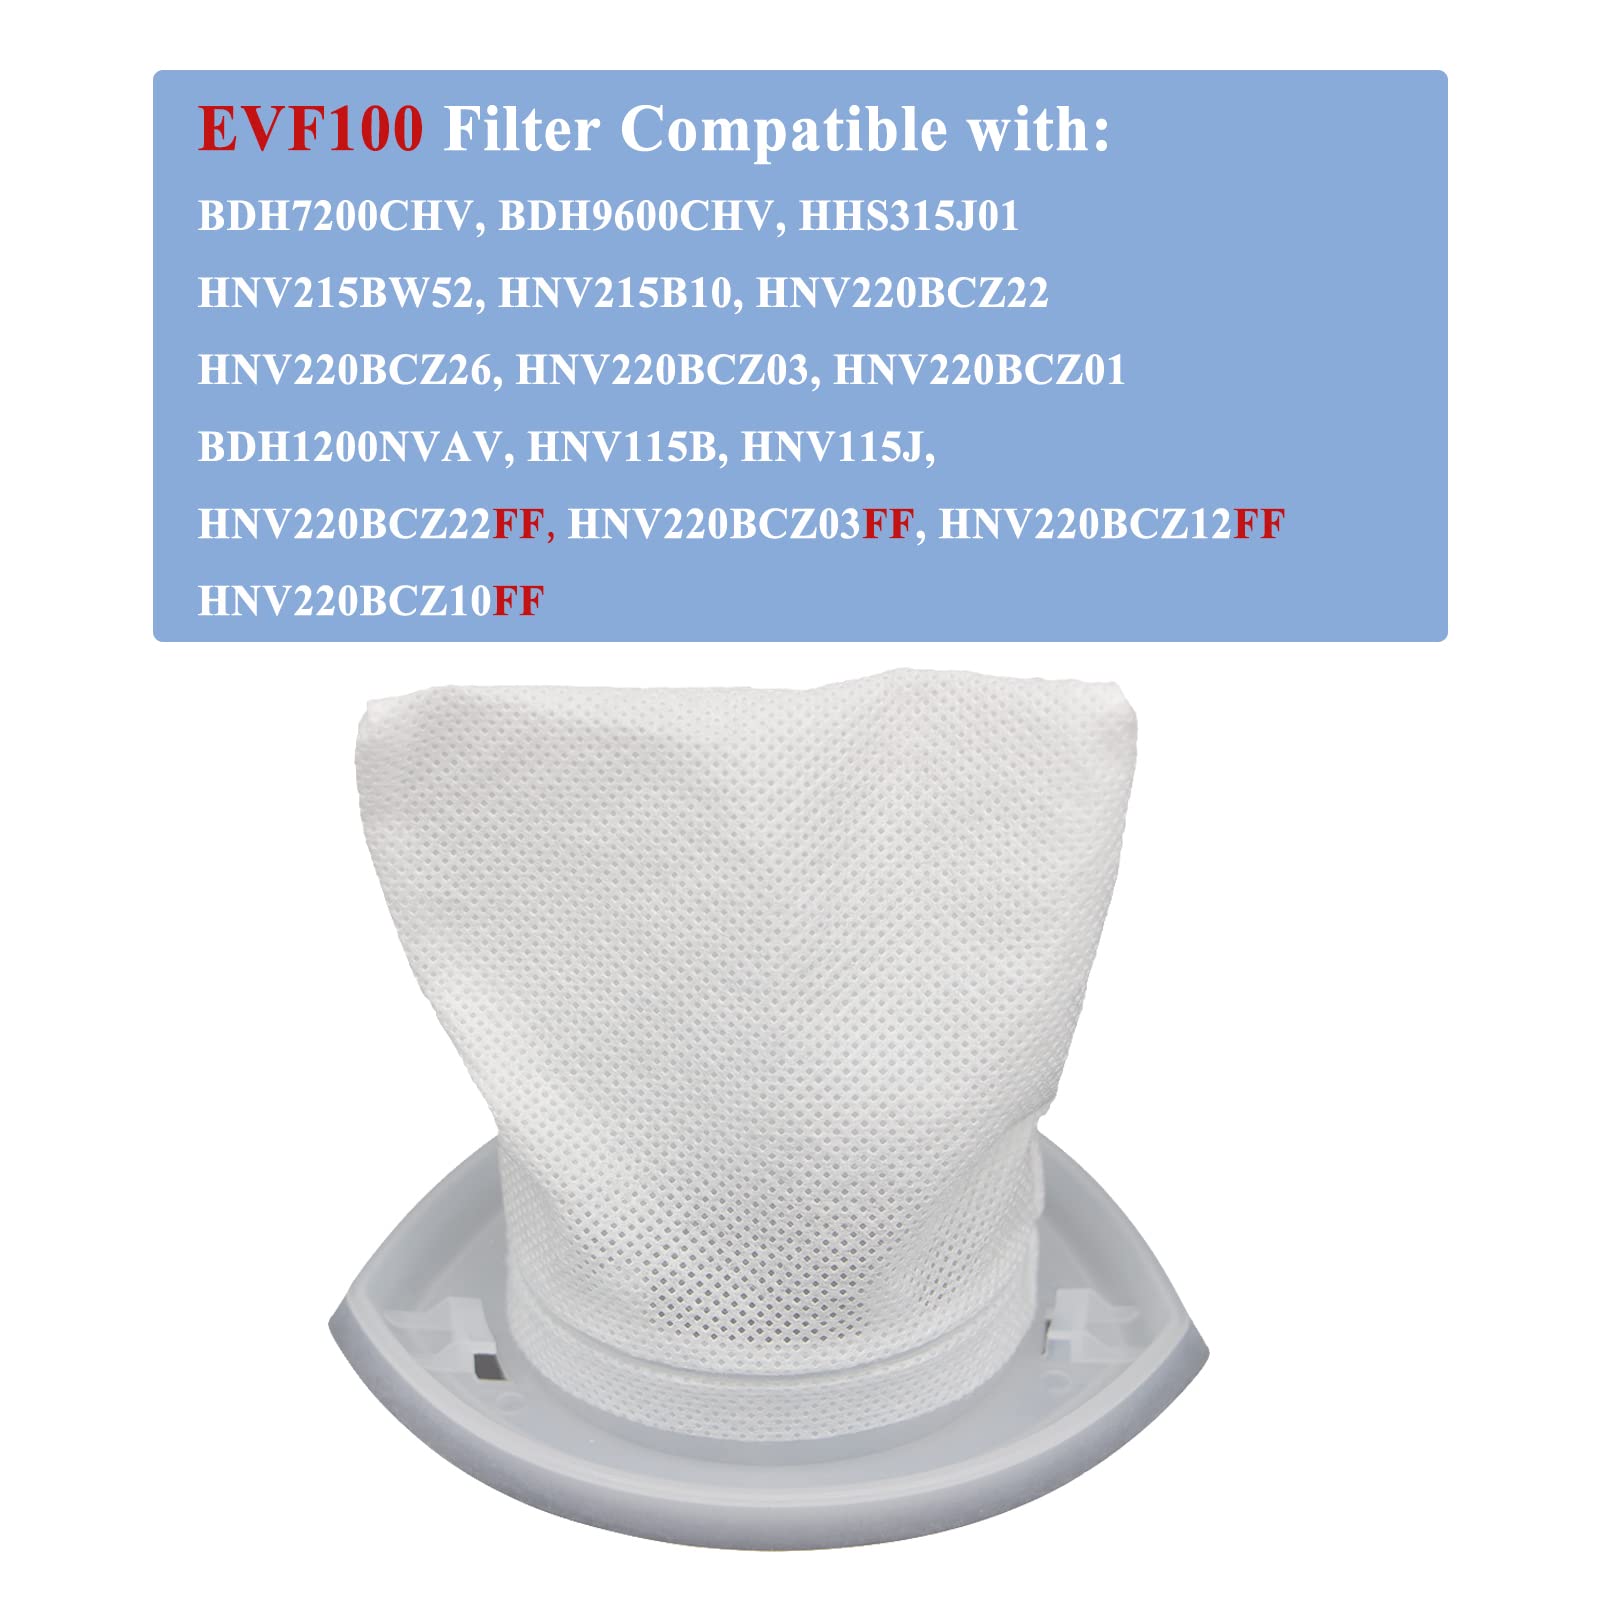 Aolleteau 6-Pack EVF100 Filters Compatible with Black+Decker HNV220B, HNV215B, HNV115B Series, HHS315J01, BDH7200CHV, BDH9600CHV, HNV220BCZ Series Hand Vacuum Cleaners. 【Note: Not HNVCF10 Filter !!!】